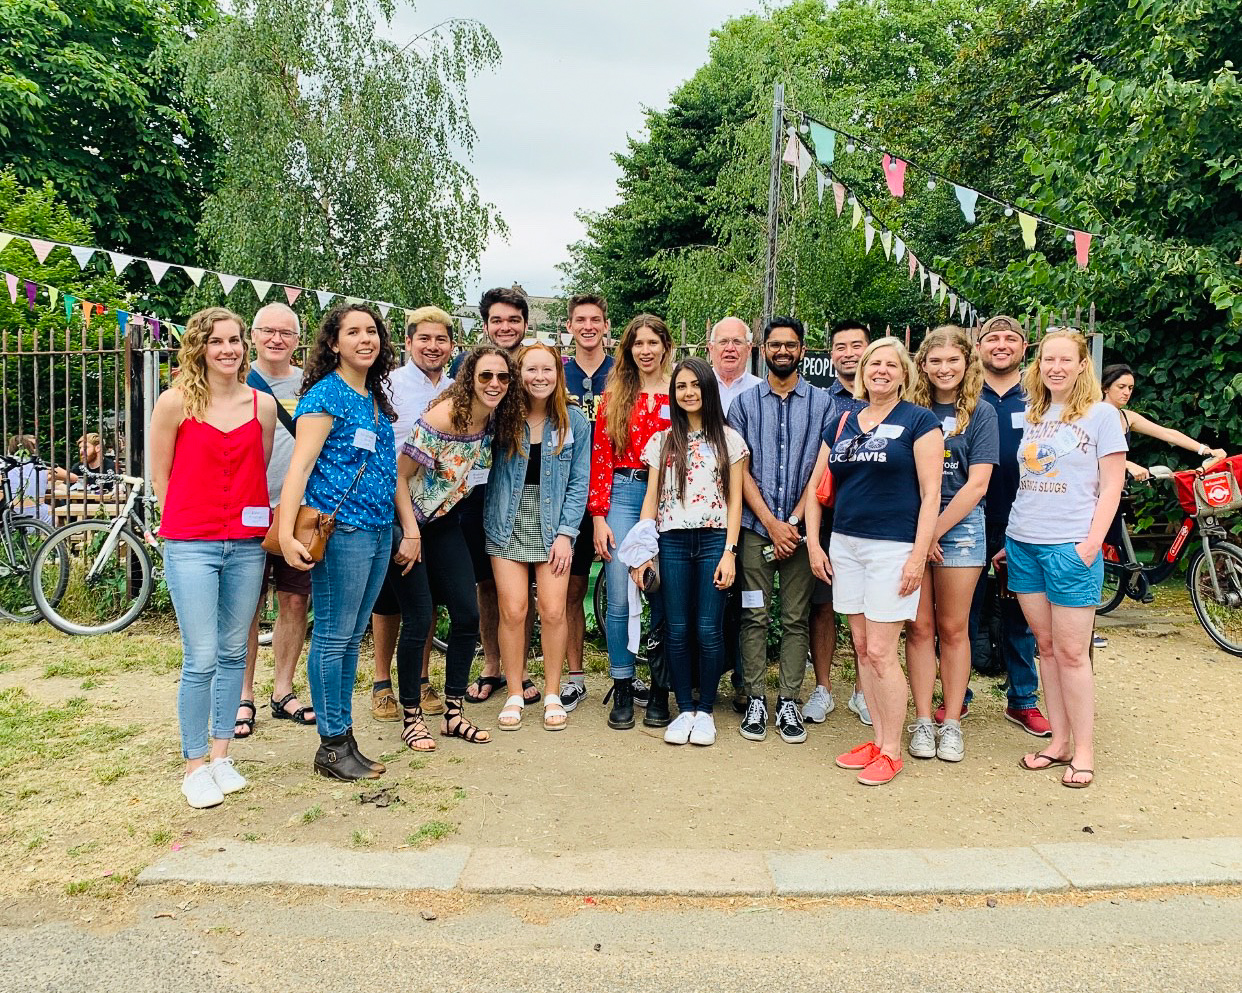 A group of UC students stand among UC alumni at an outdoor 4th of July barbecue in a London park.